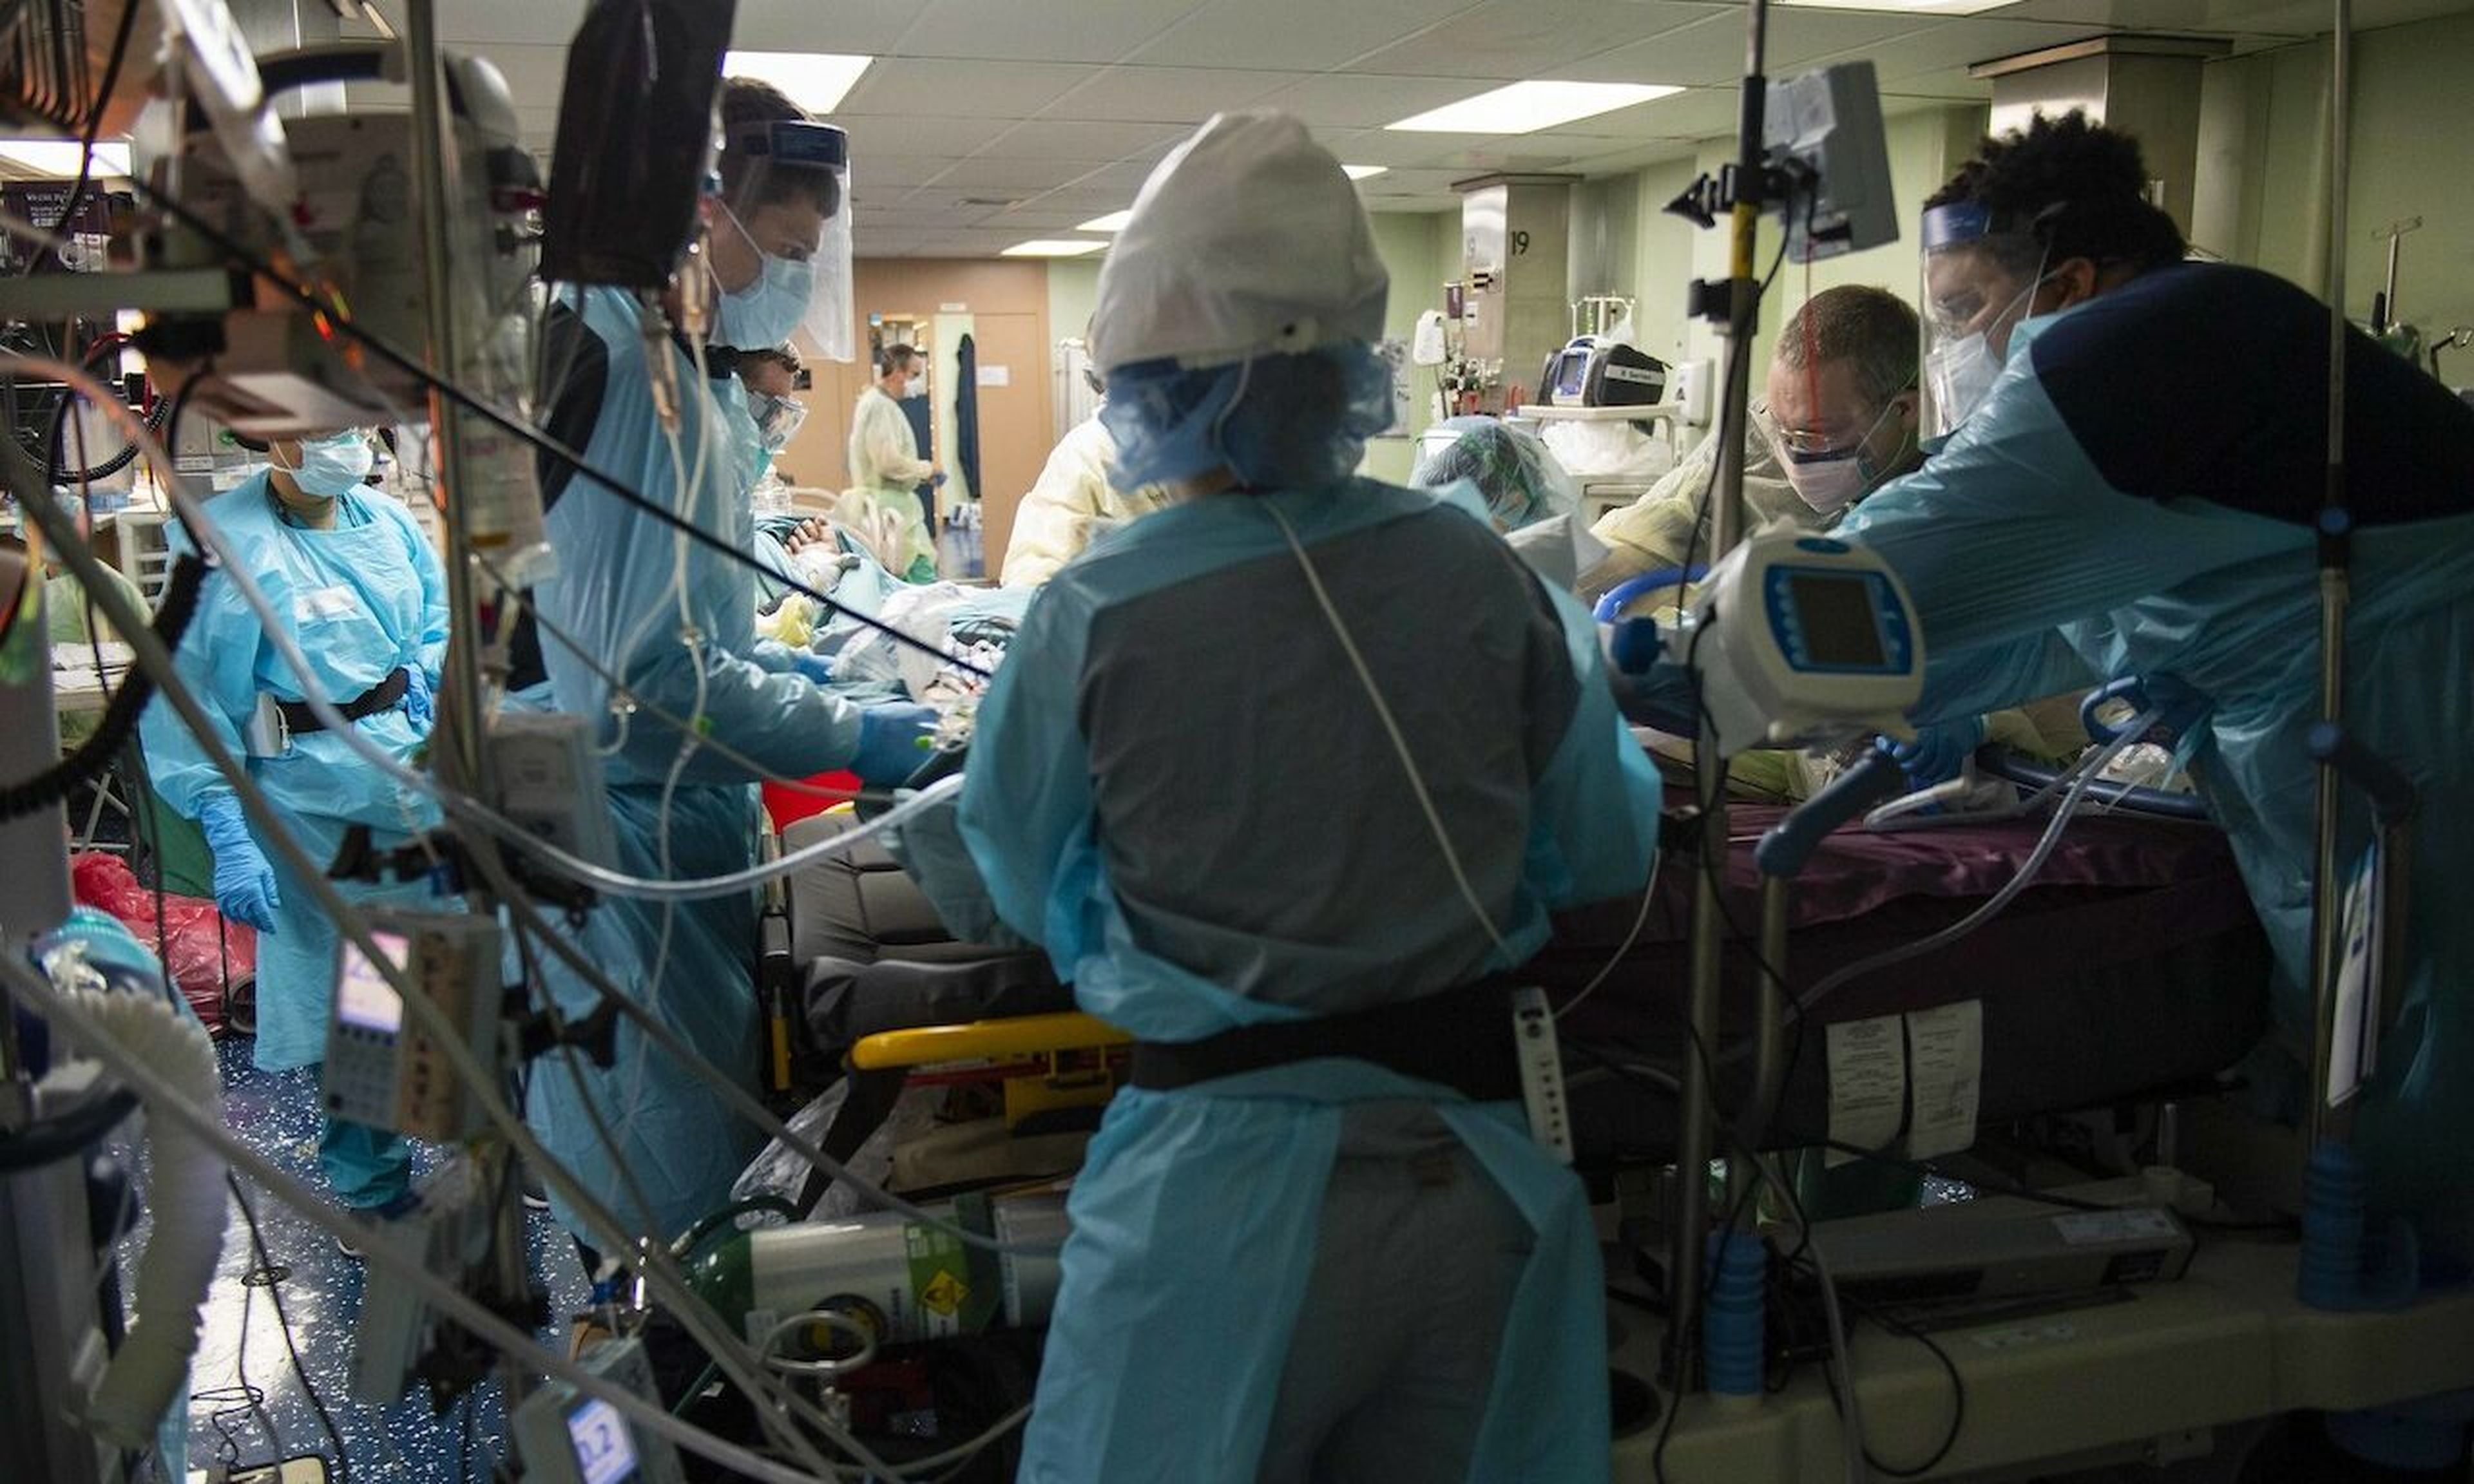 Paramedics prepare a patient for transport in the intensive care unit aboard the hospital ship USNS Comfort (T-AH 20). (U.S. Navy photo by Mass Communication Specialist 2nd Class Sara Eshleman)